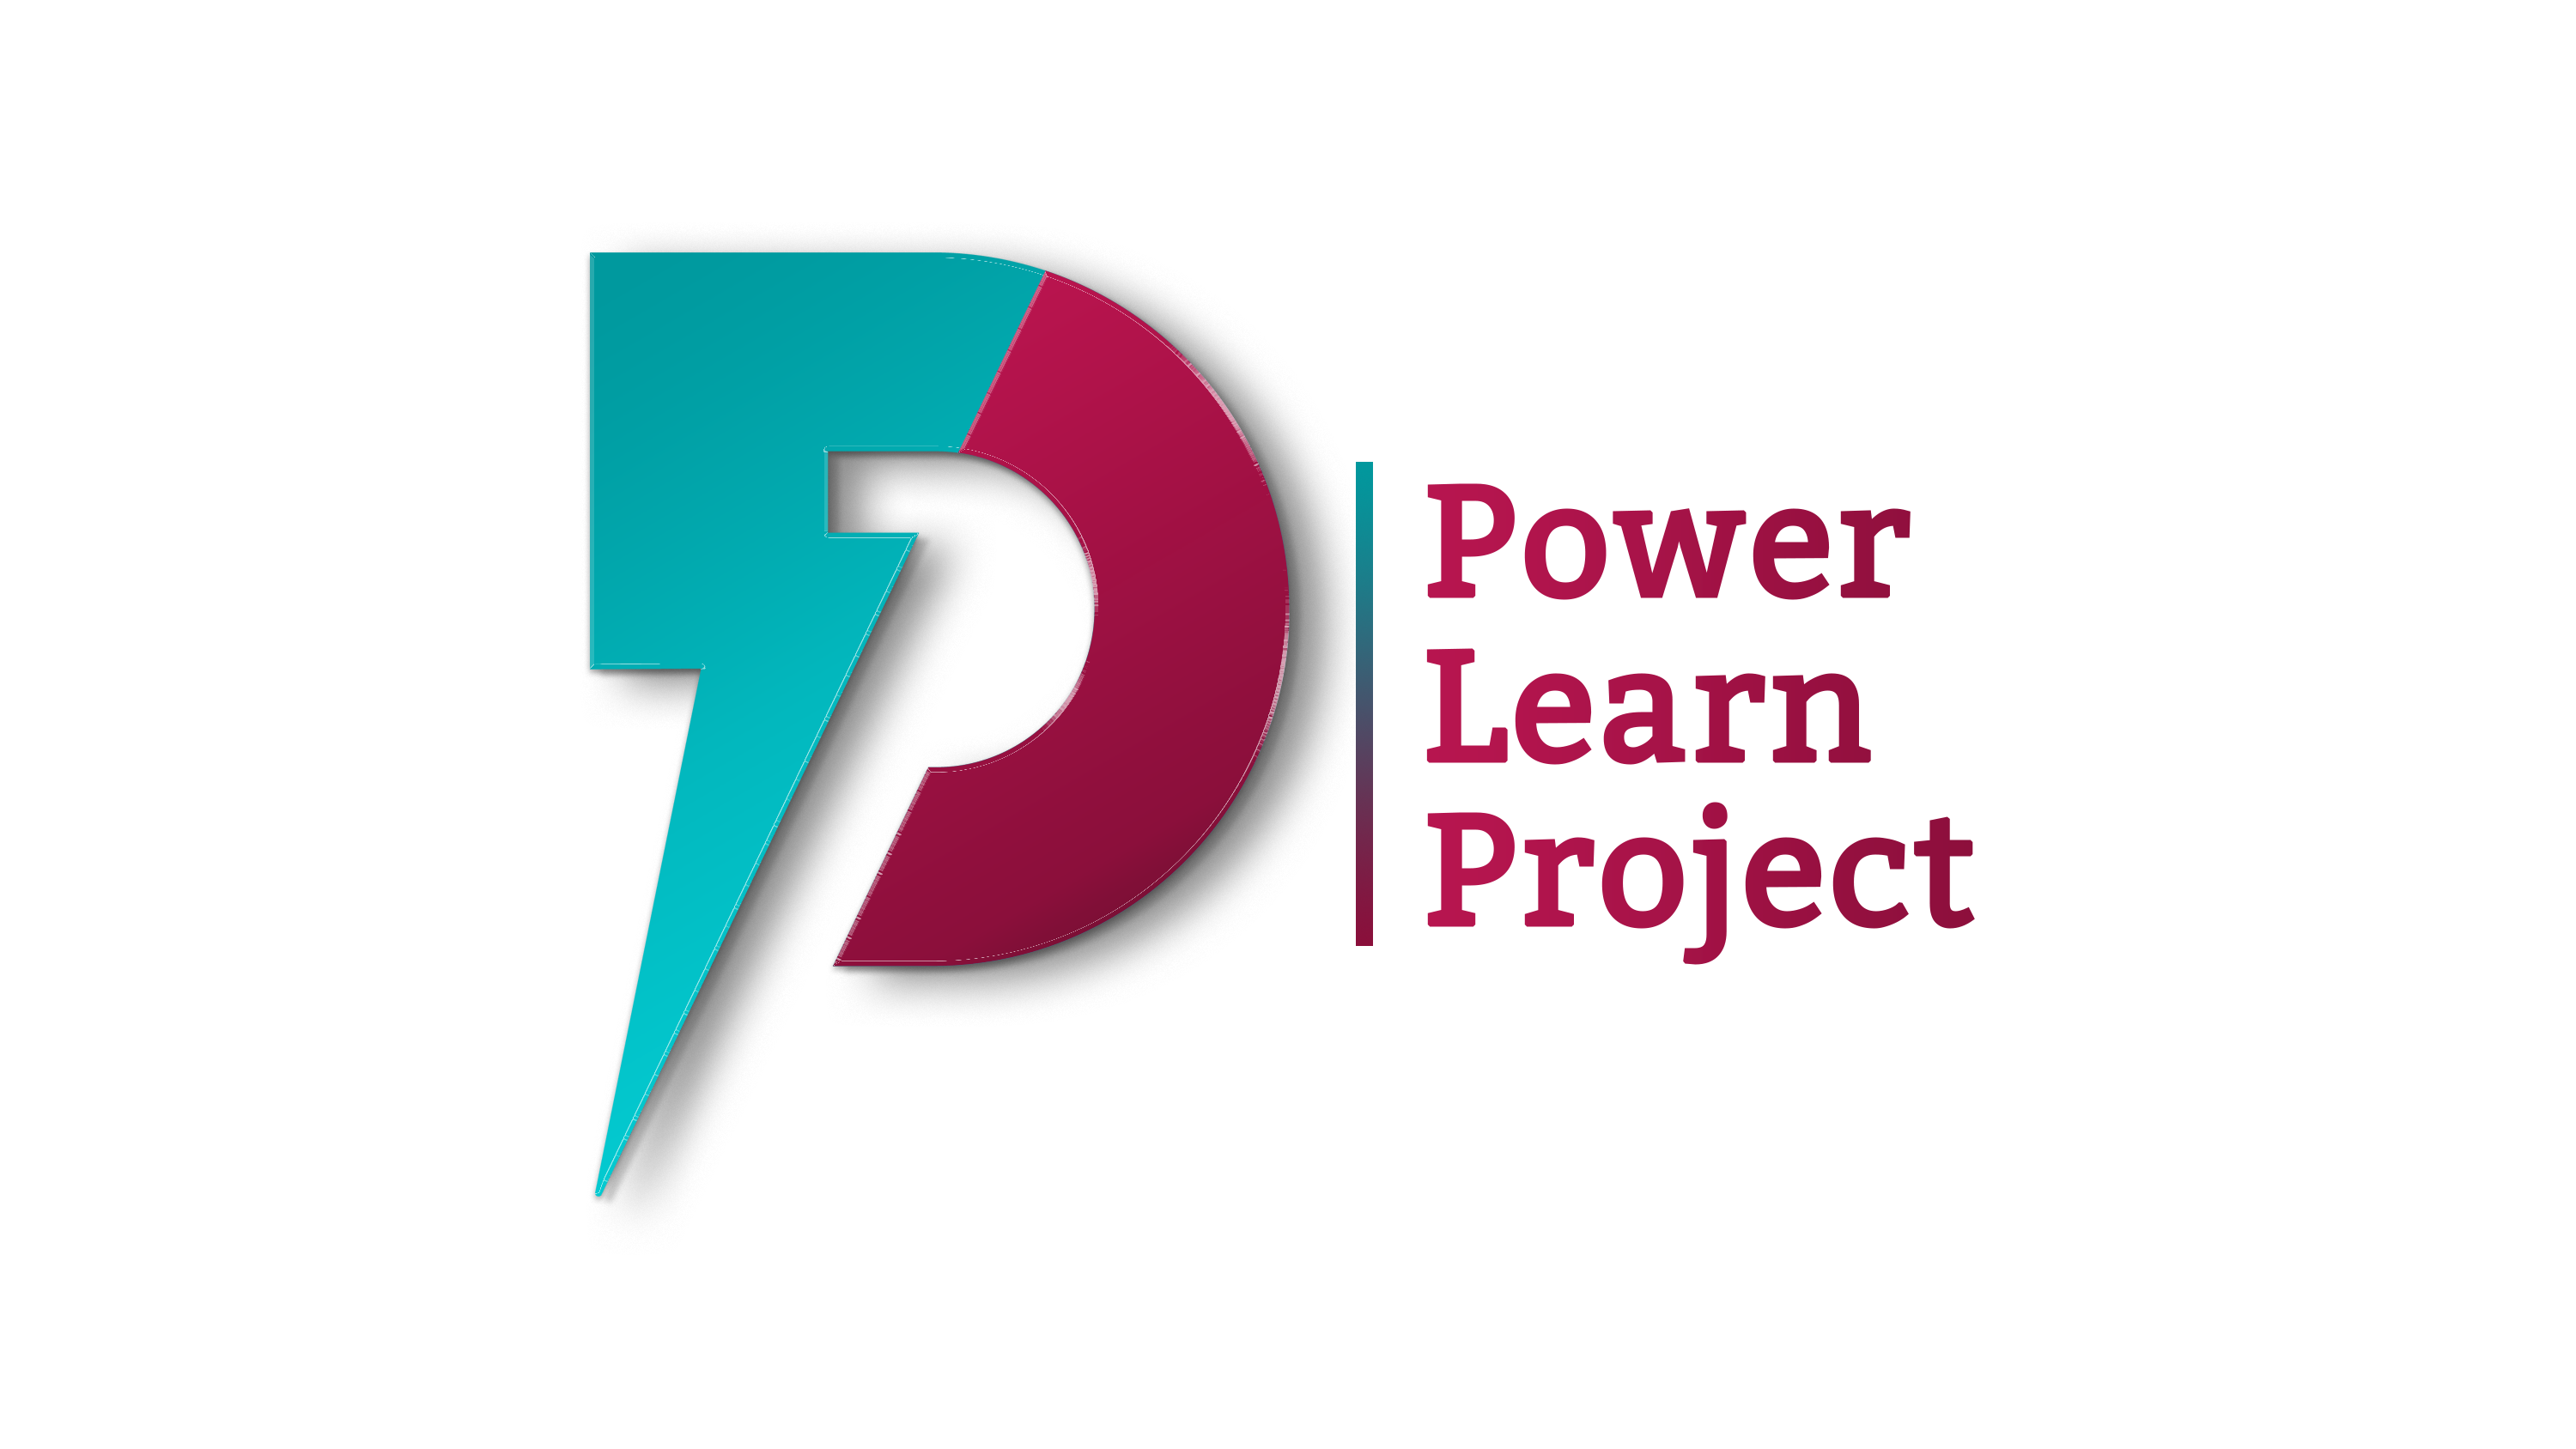 Impact Organization Power Learn Project launches One Million Developers For Africa Program